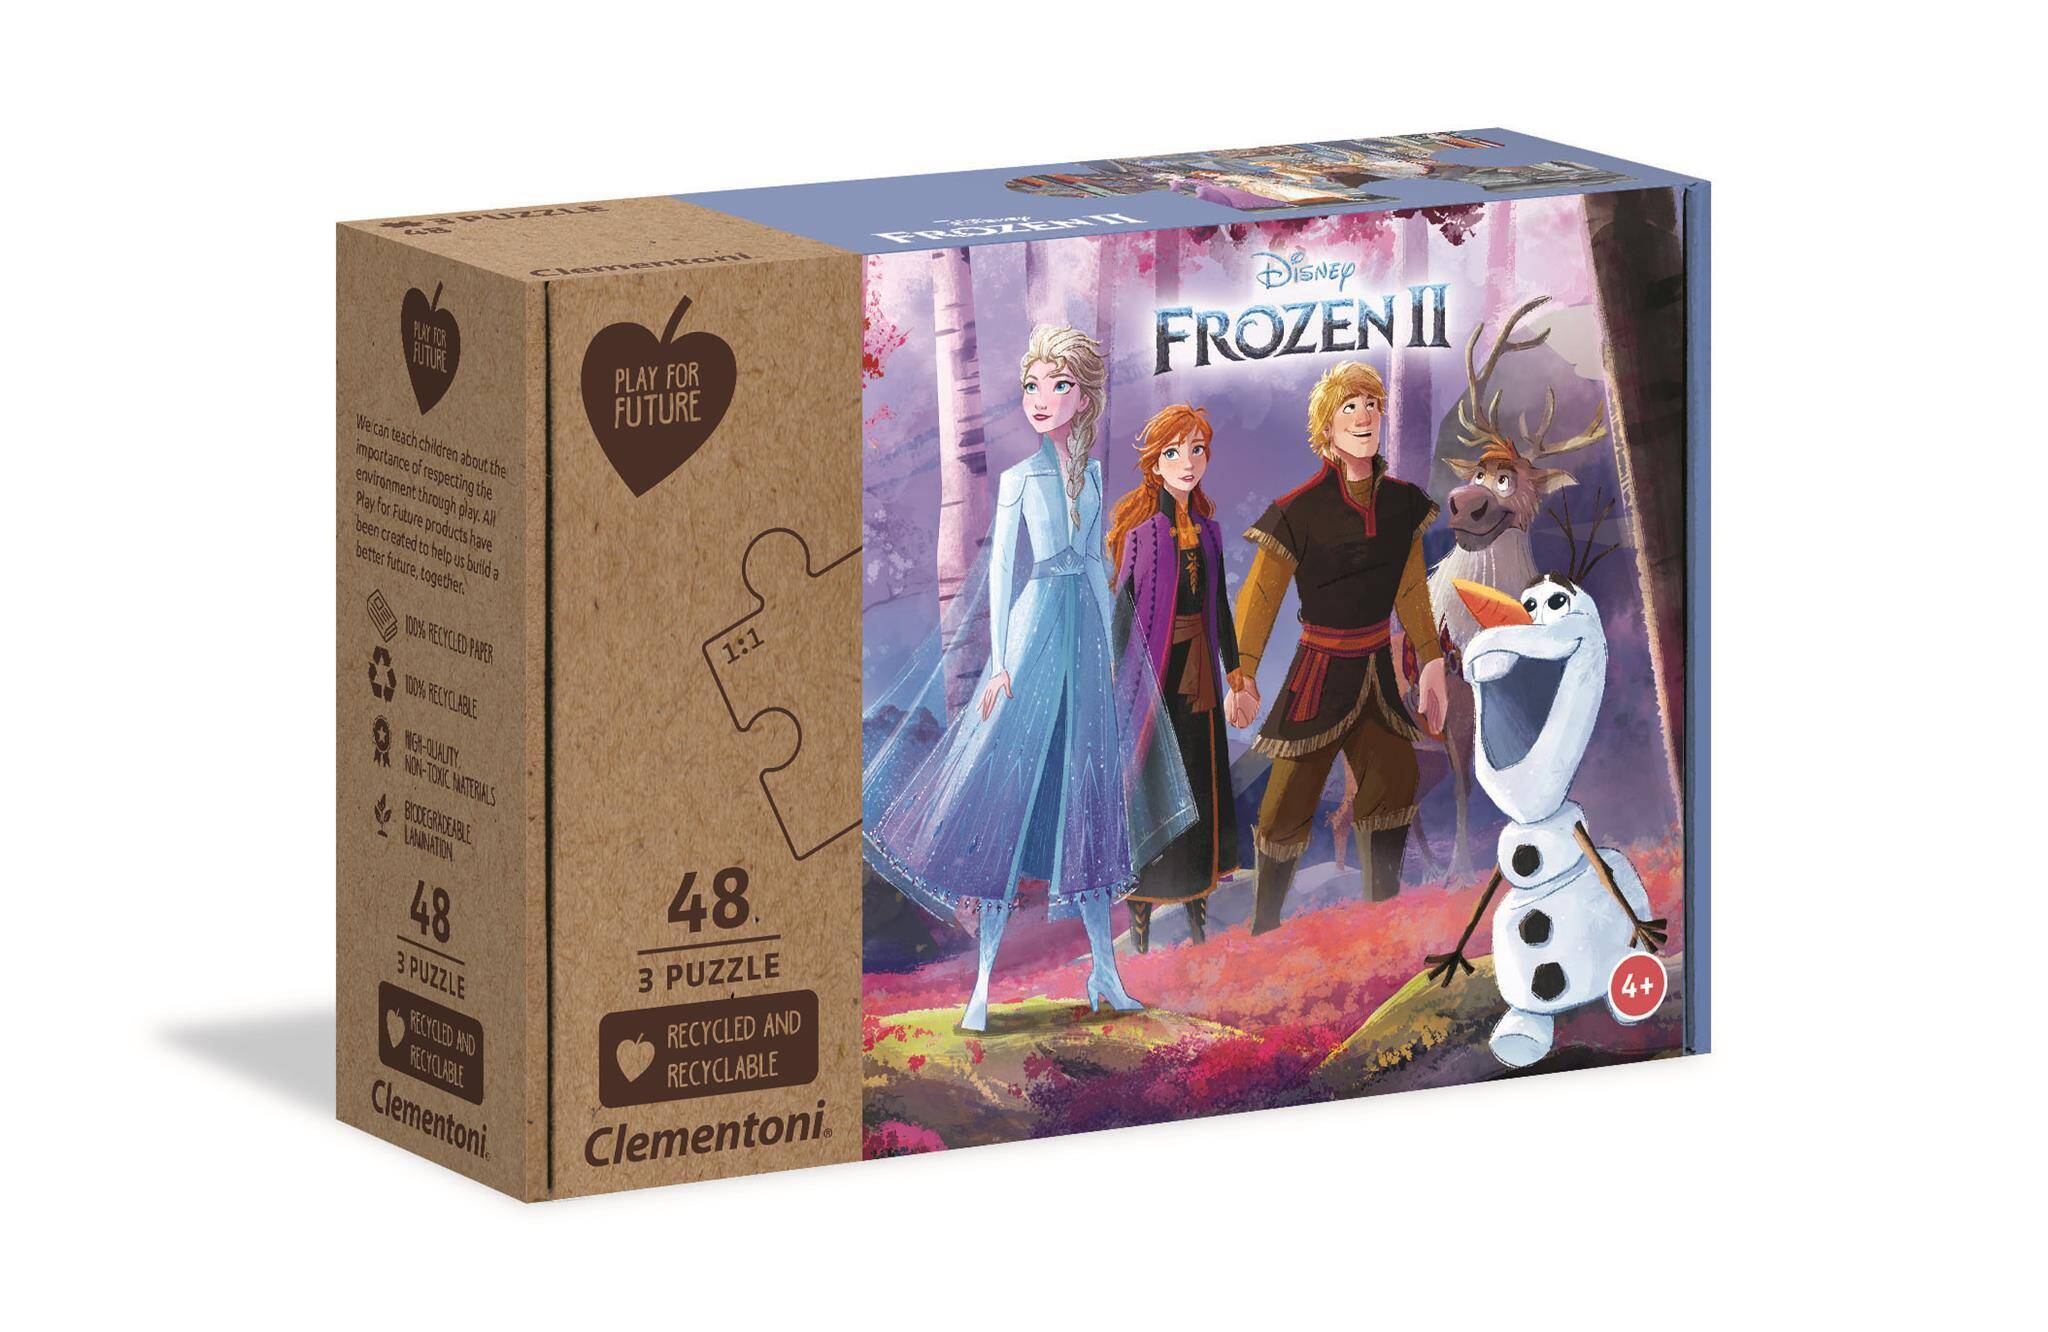 Puzzle 3w1 play for future Frozen 2 25255